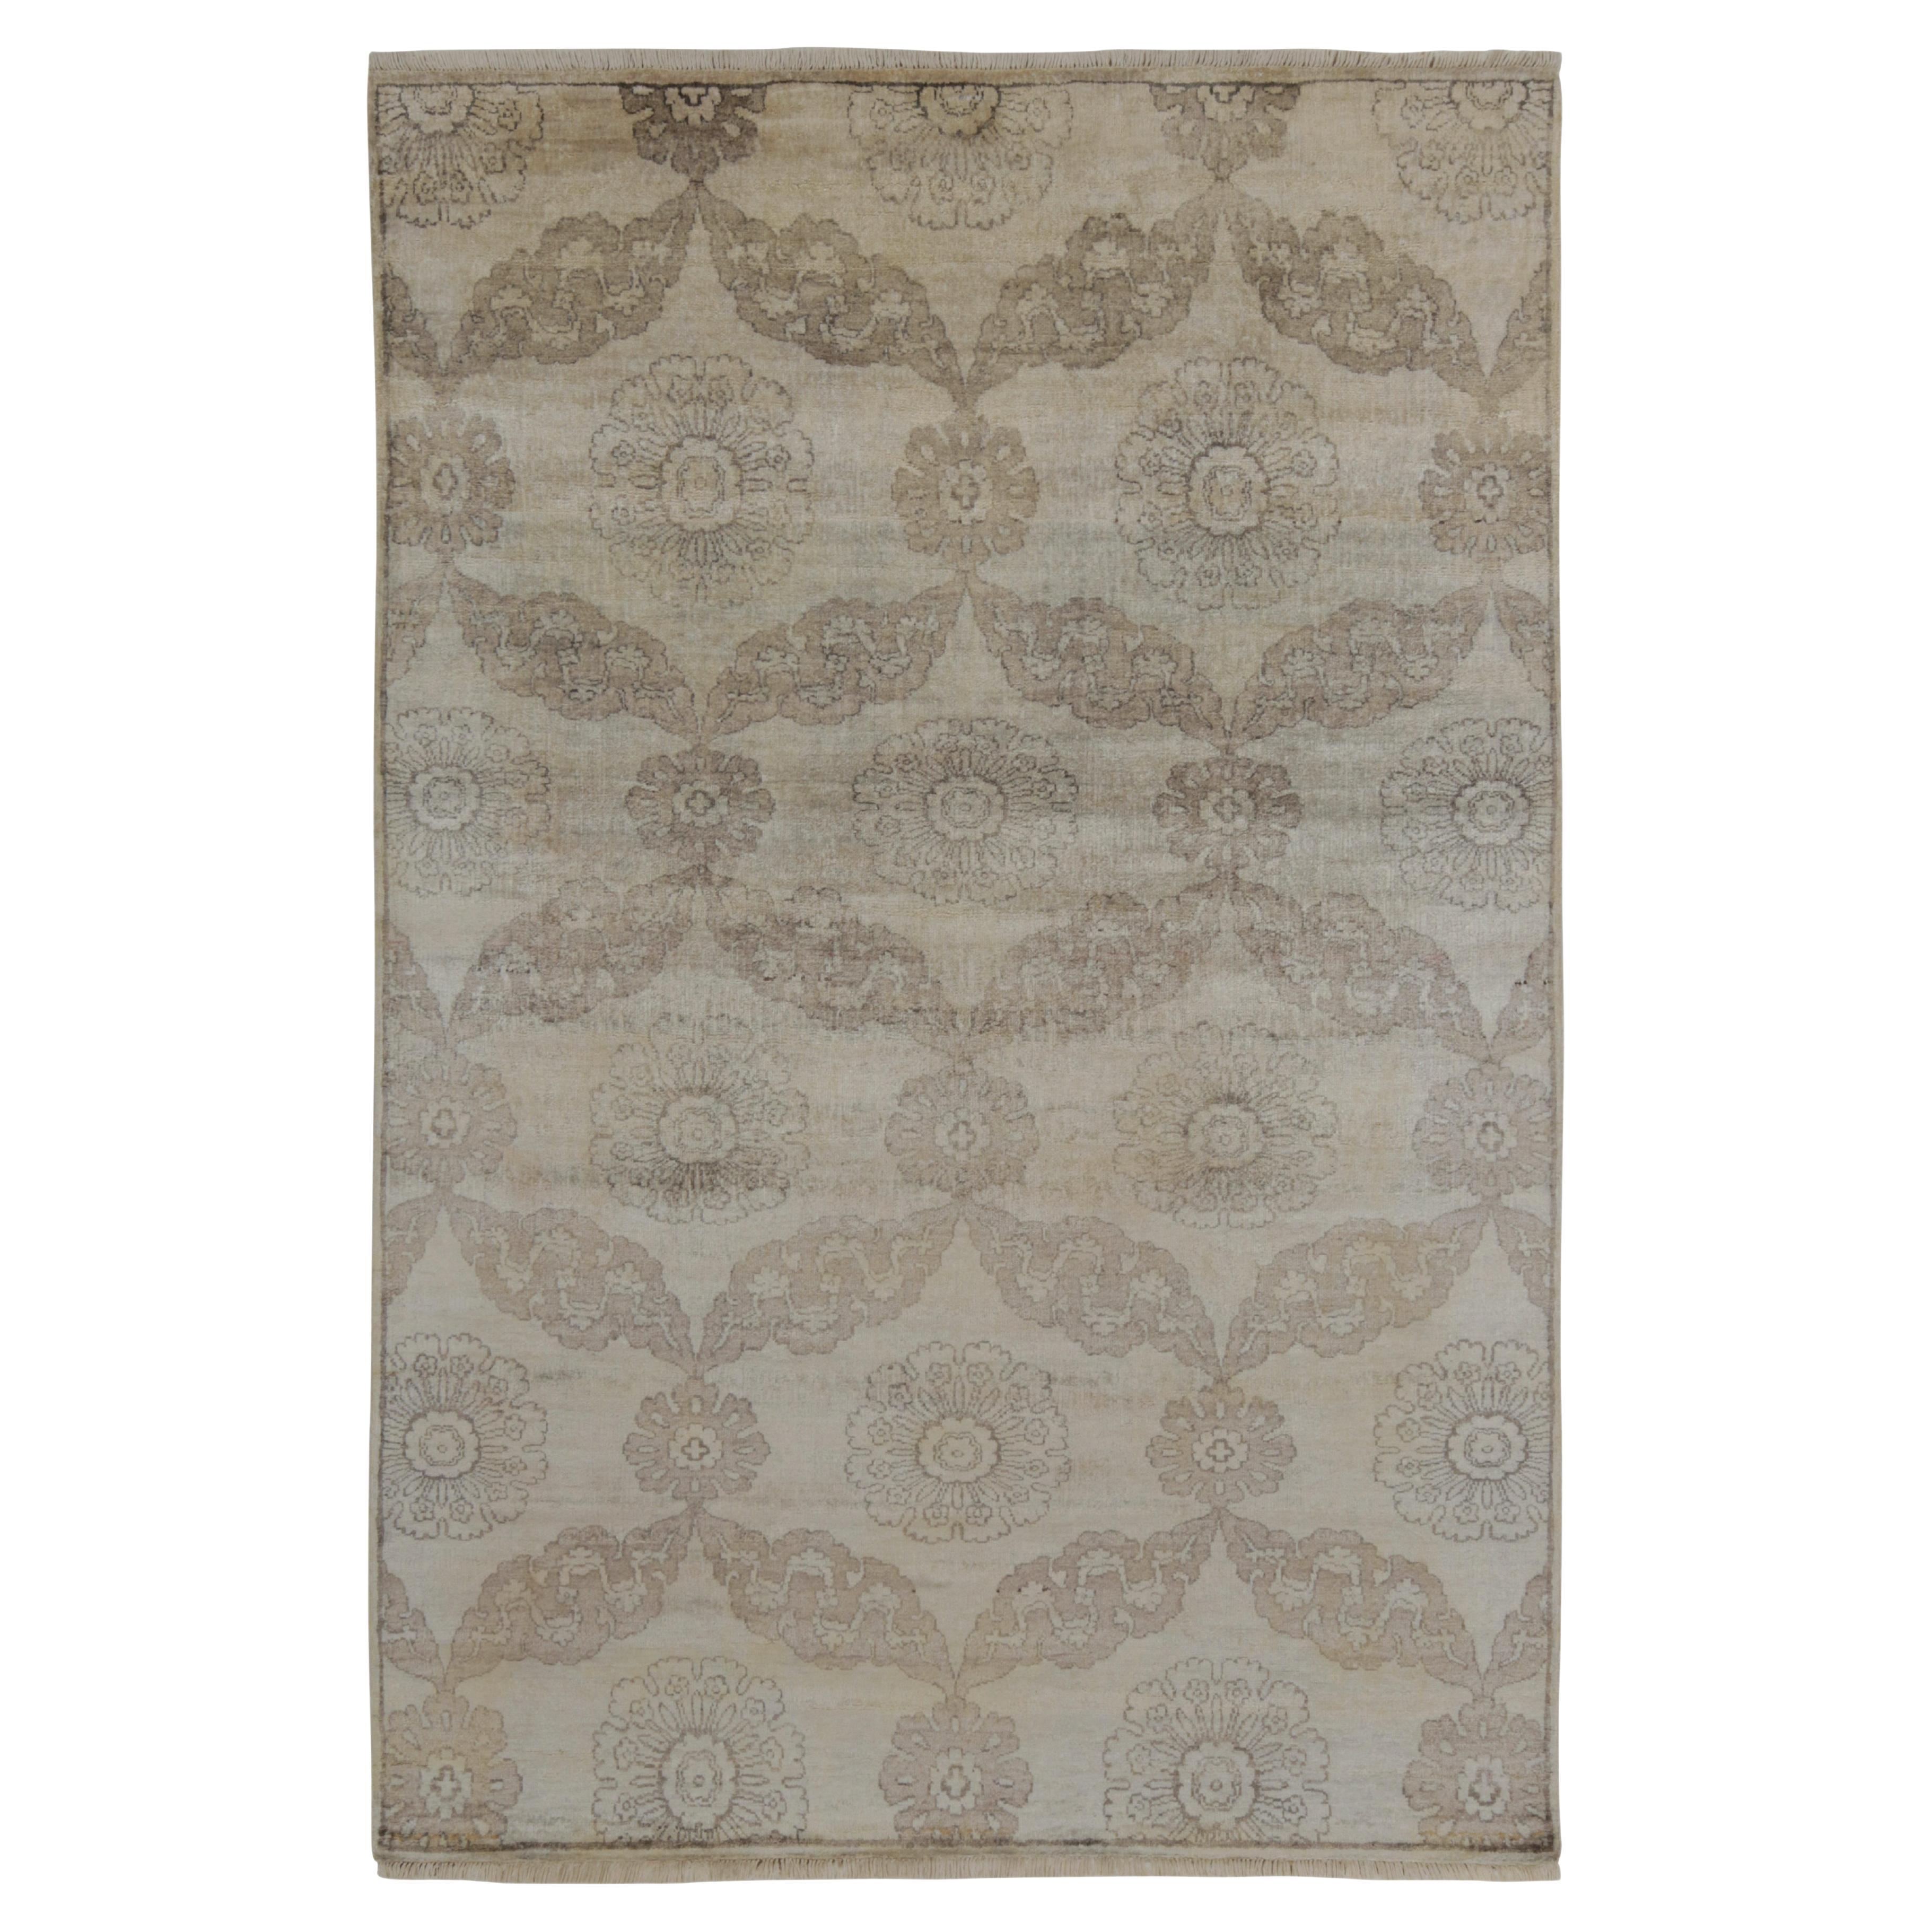 Rug & Kilim’s Classic Style Rug in Beige-Brown and Silver-Gray Floral Patterns For Sale